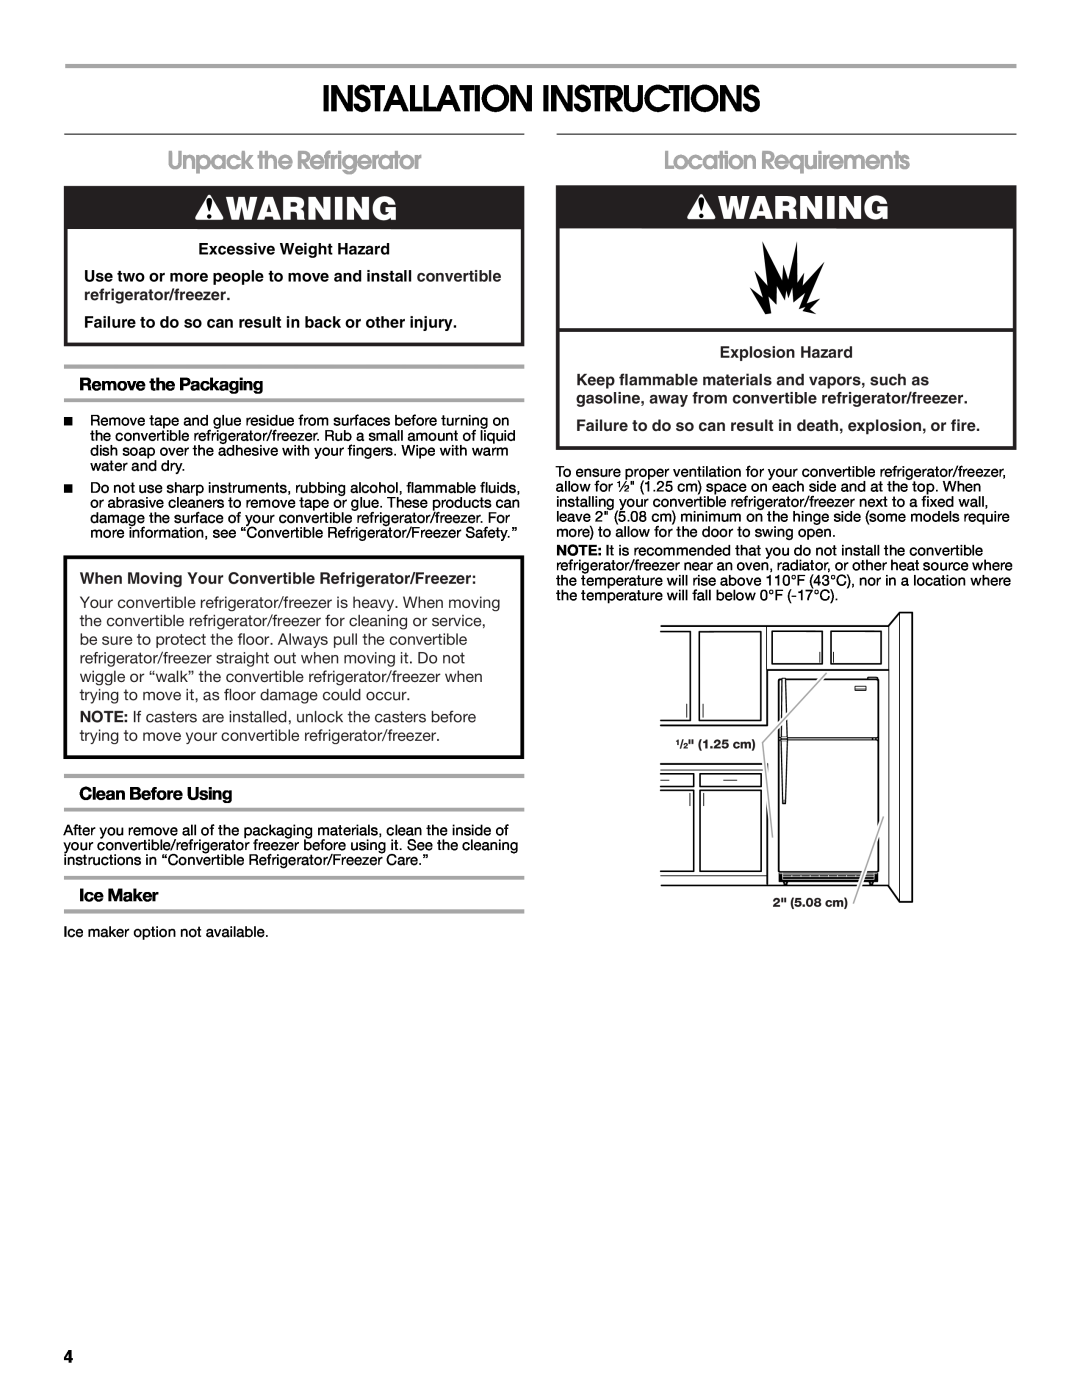 Whirlpool GAFZ21XXRK01 Installation Instructions, Unpack the Refrigerator, Location Requirements, Remove the Packaging 